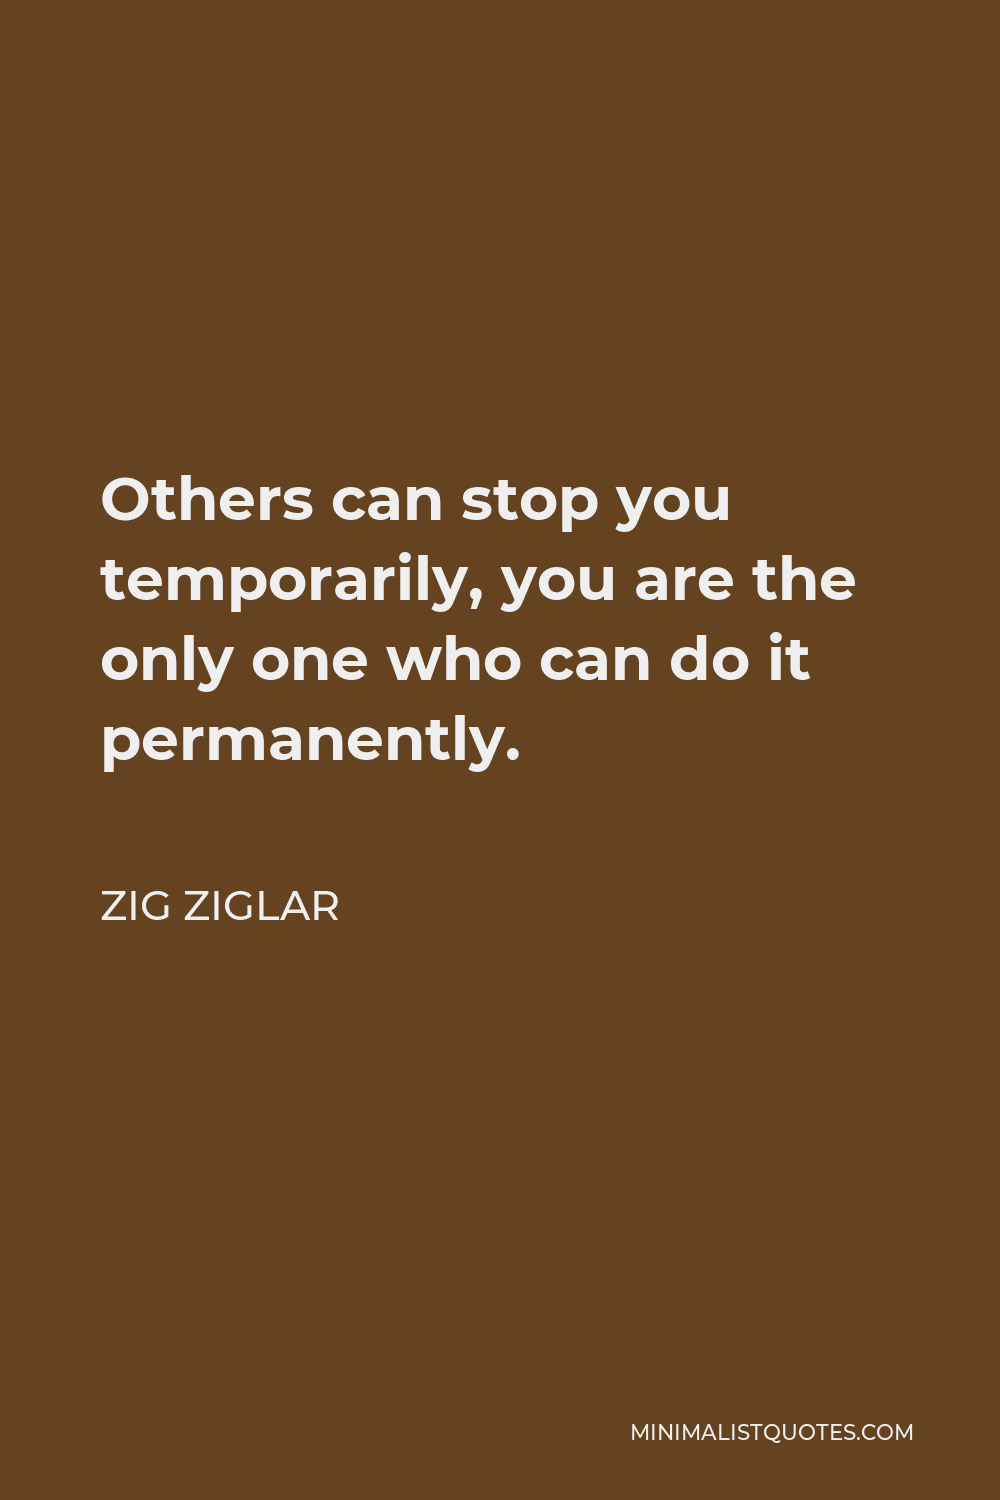 Zig Ziglar Quote - Others can stop you temporarily, you are the only one who can do it permanently.